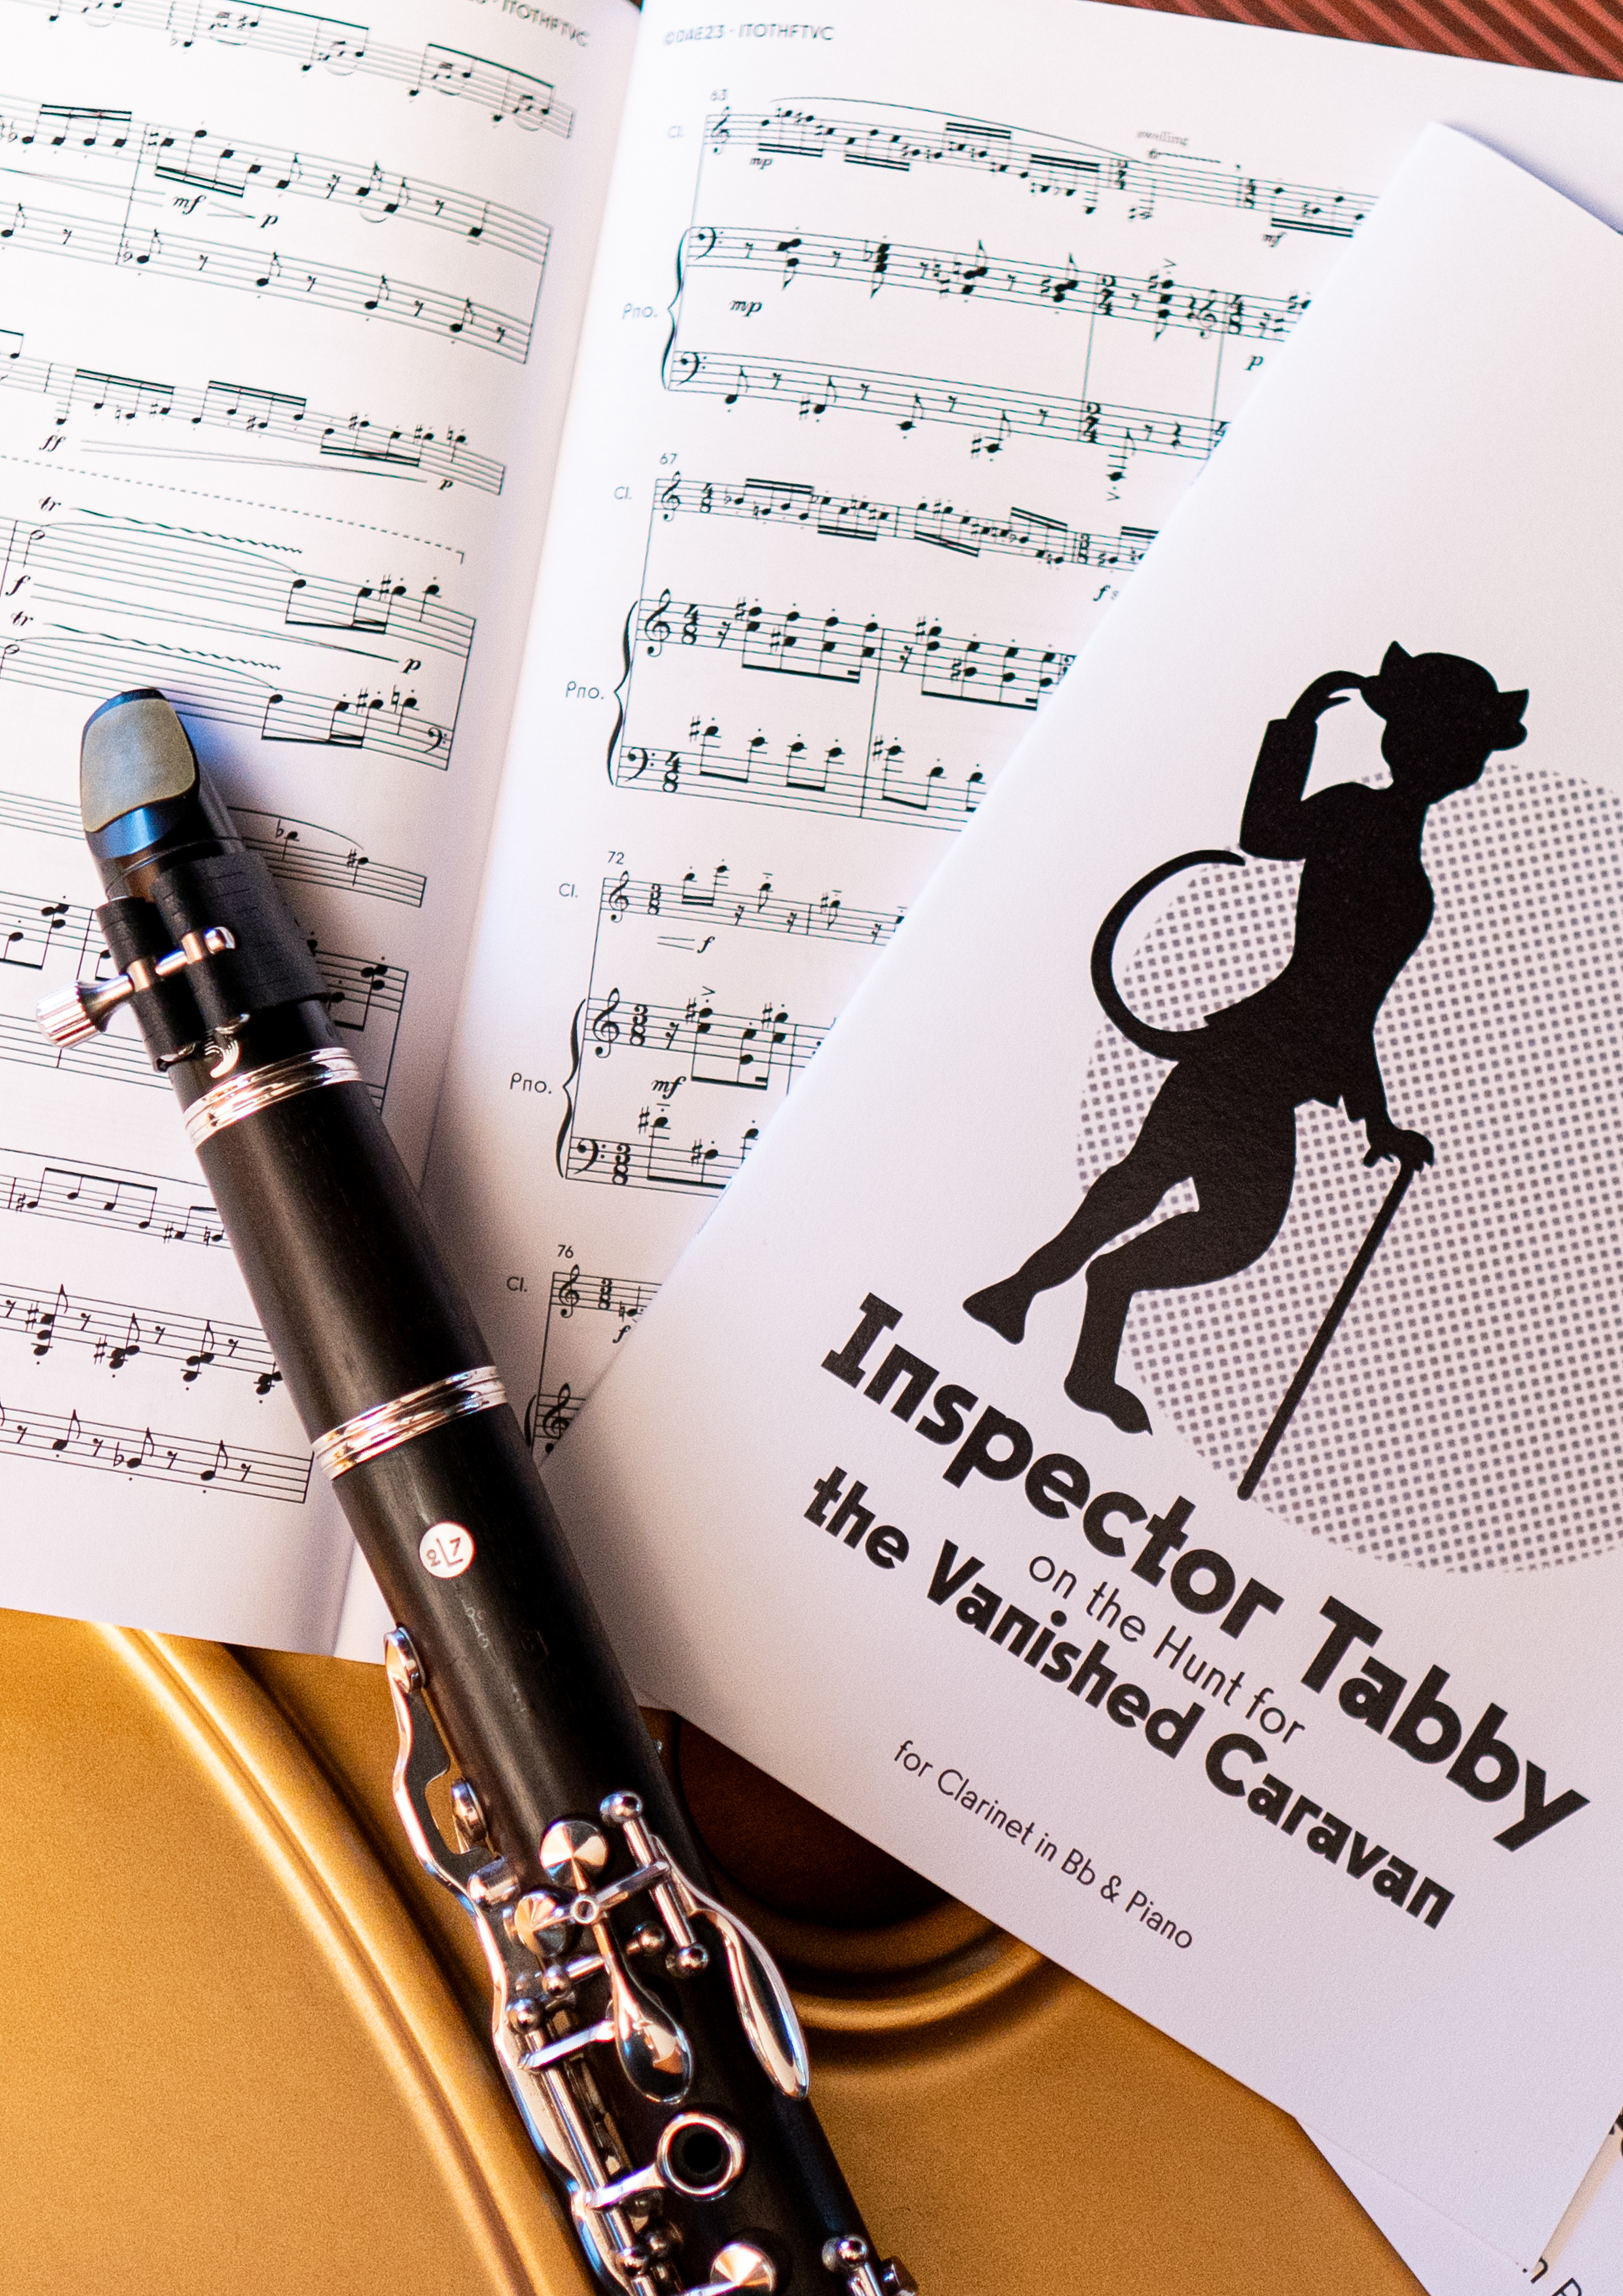 Inspector Tabby on the Hunt for the Vanished Caravan – Sheet music